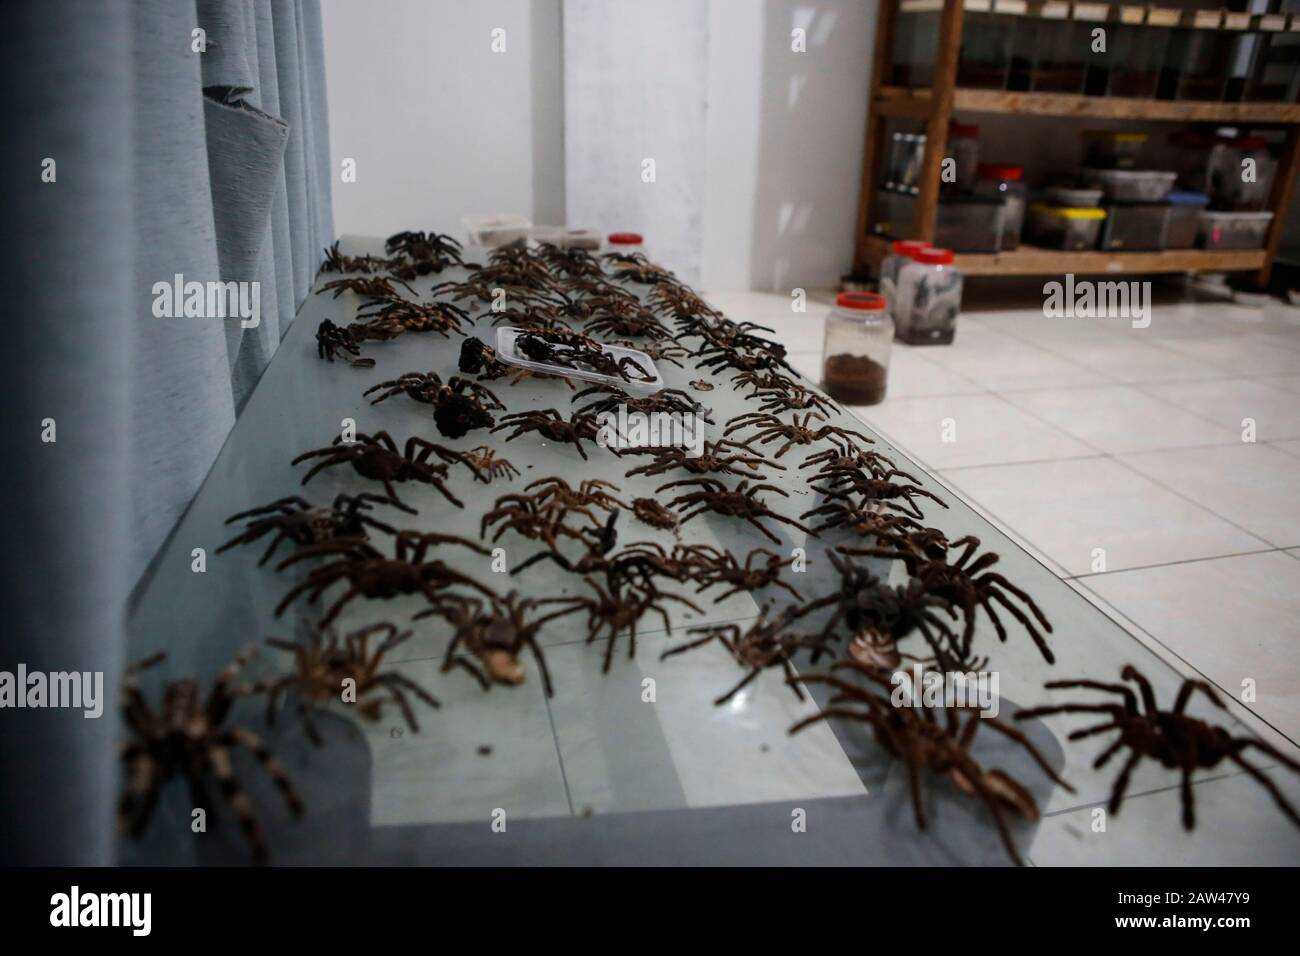 A number tarantulas from several species are seen in Lampung, Indonesia. Aldo Tan (tarantula collector) breeds thousands of tarantulas, the tarantula (Harpactira Pulchripes) from Africa, a rare species in the world. The price of a one-year-old tarantula reaches Rp 2.5 million per head. Stock Photo